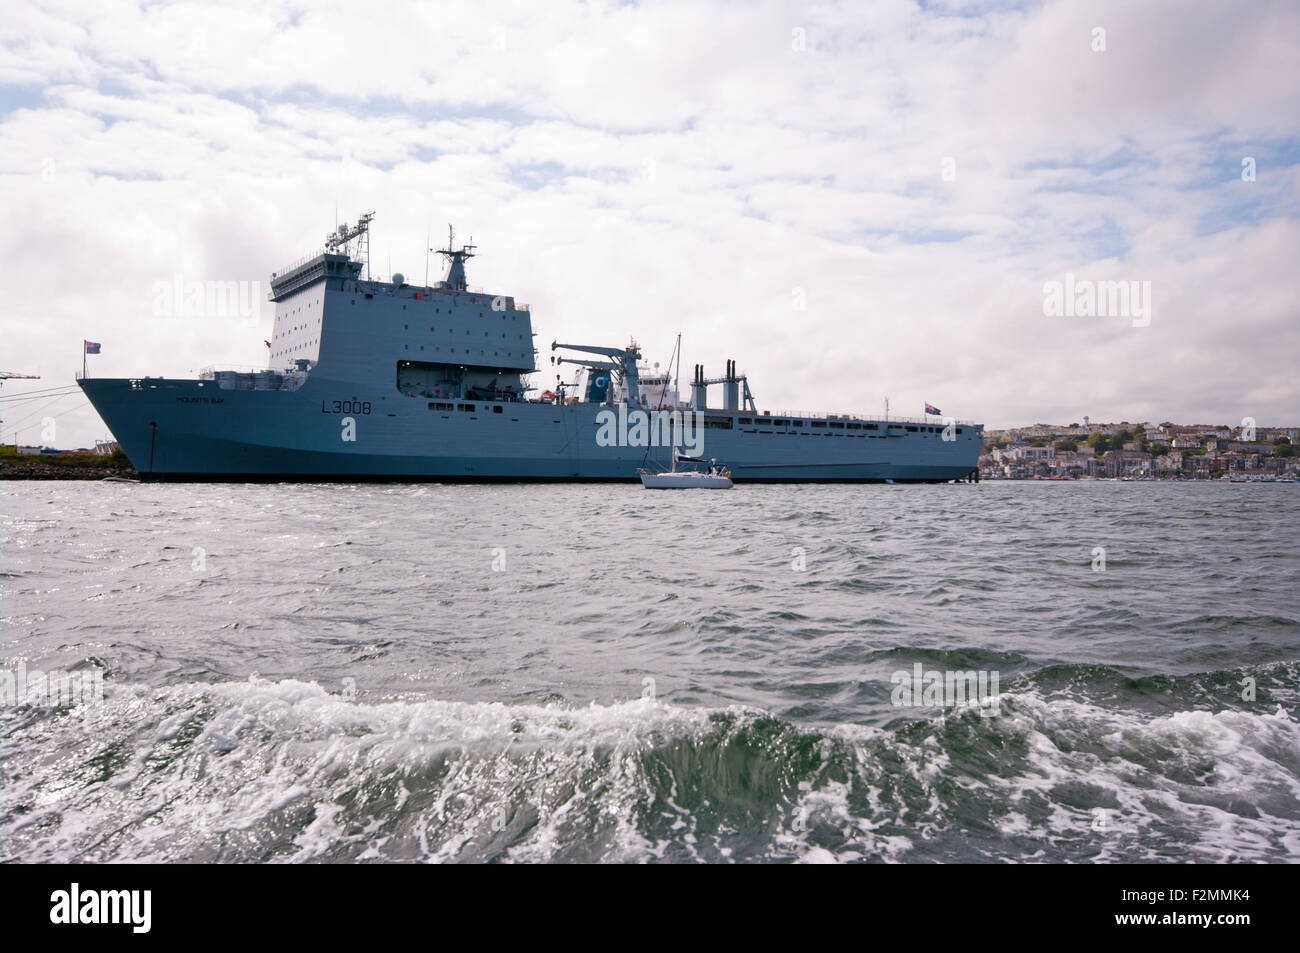 Royal Fleet Auxiliary landing Ship Dock Mounts Bay L3008 Moored In Falmouth Harbour Cornwall England UK Stock Photo